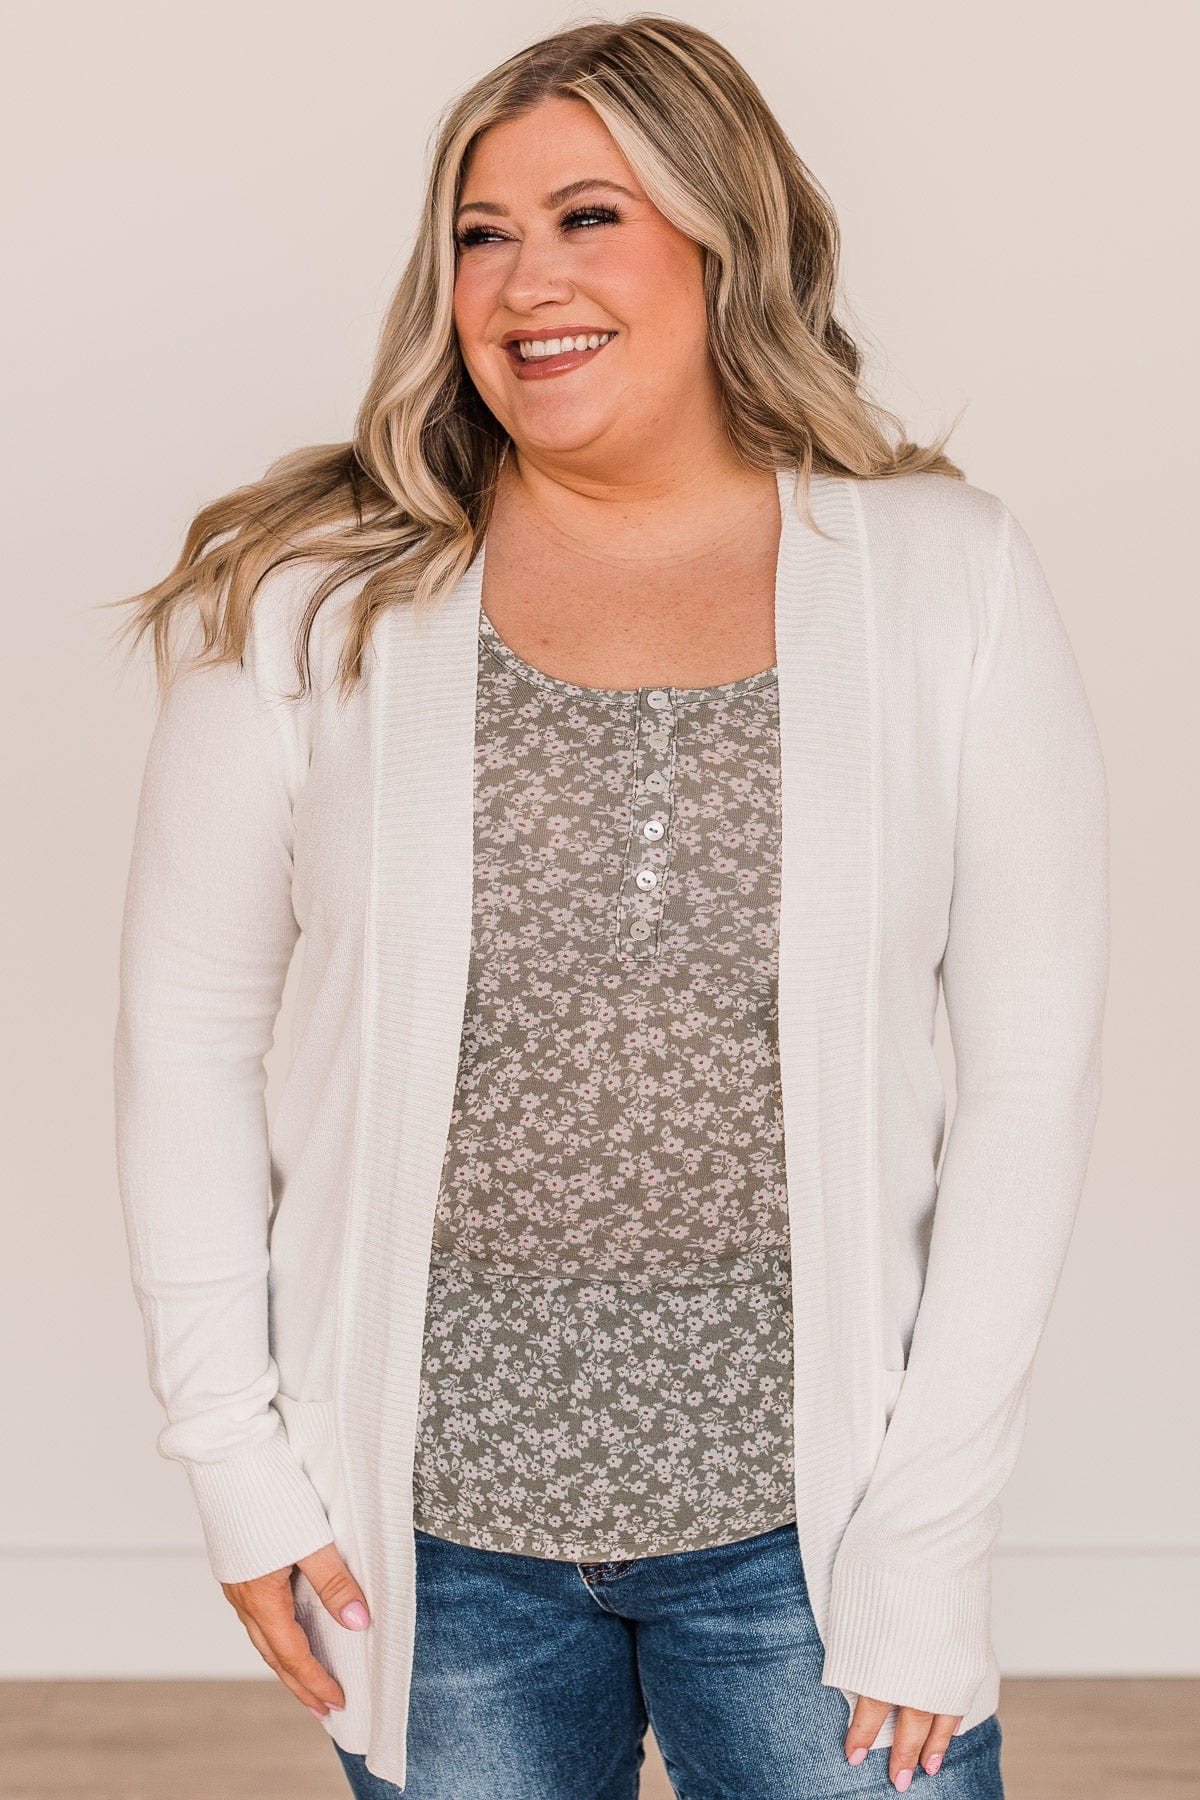 Comfortable With Myself Knit Cardigan- Off-White – The Pulse Boutique